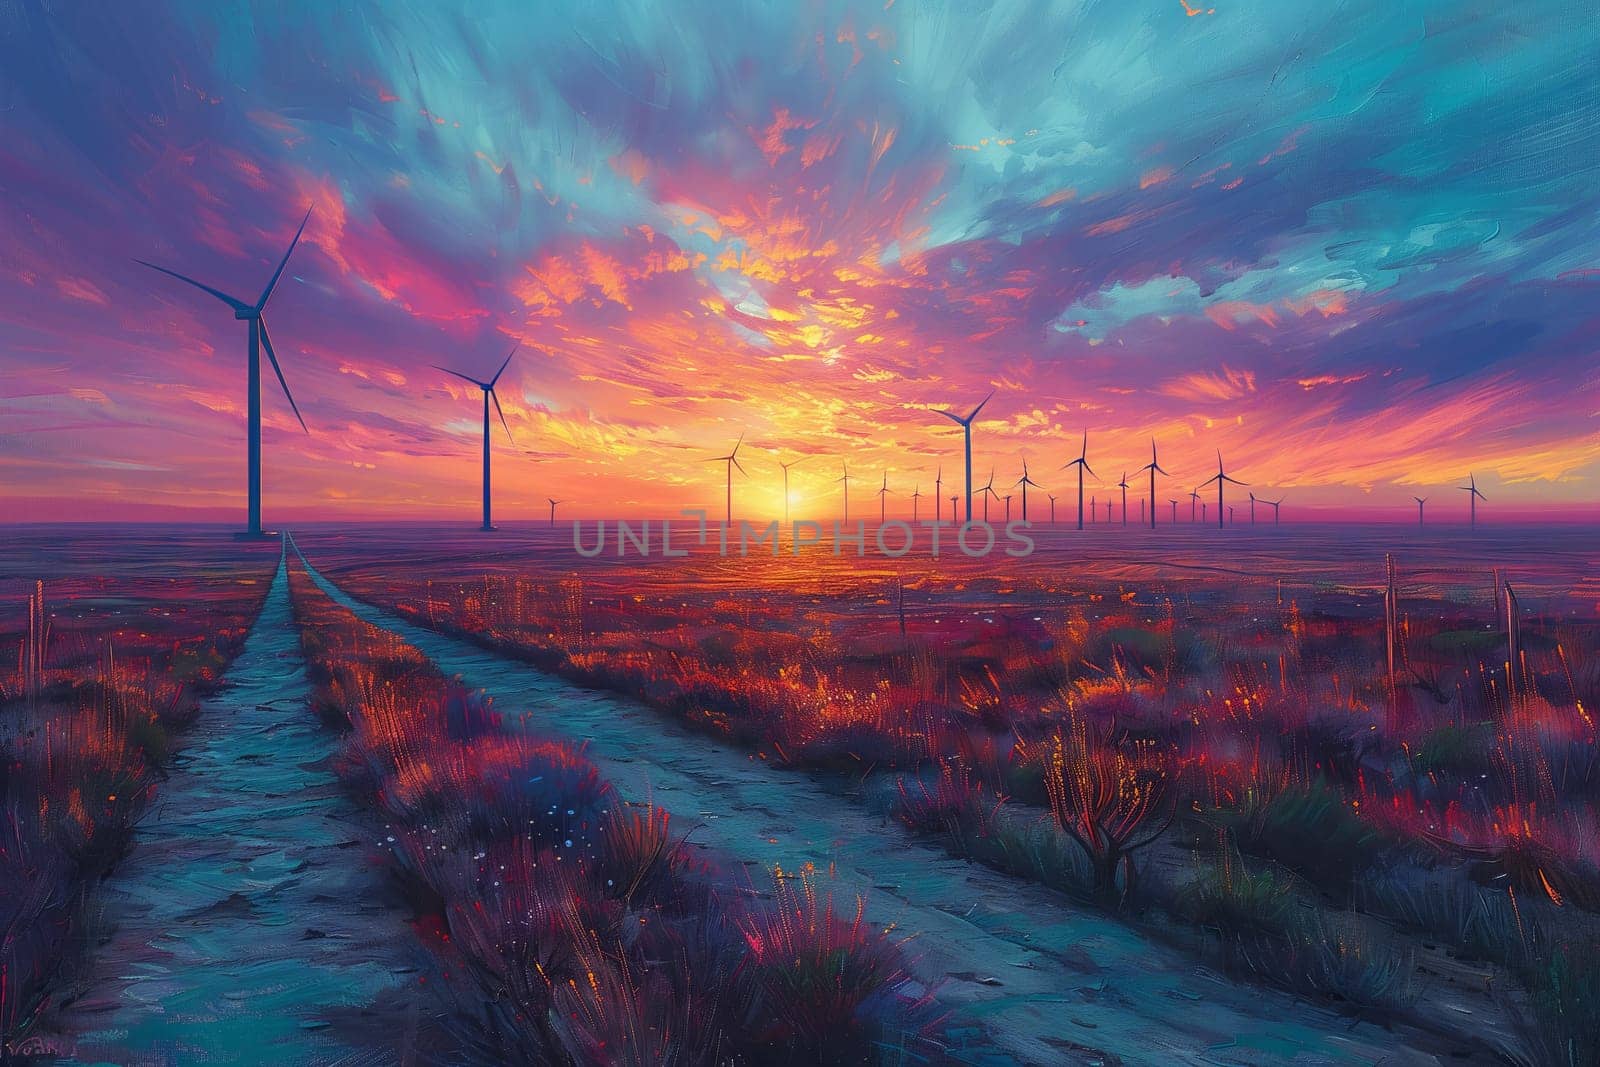 a painting of a field with windmills at sunset by richwolf